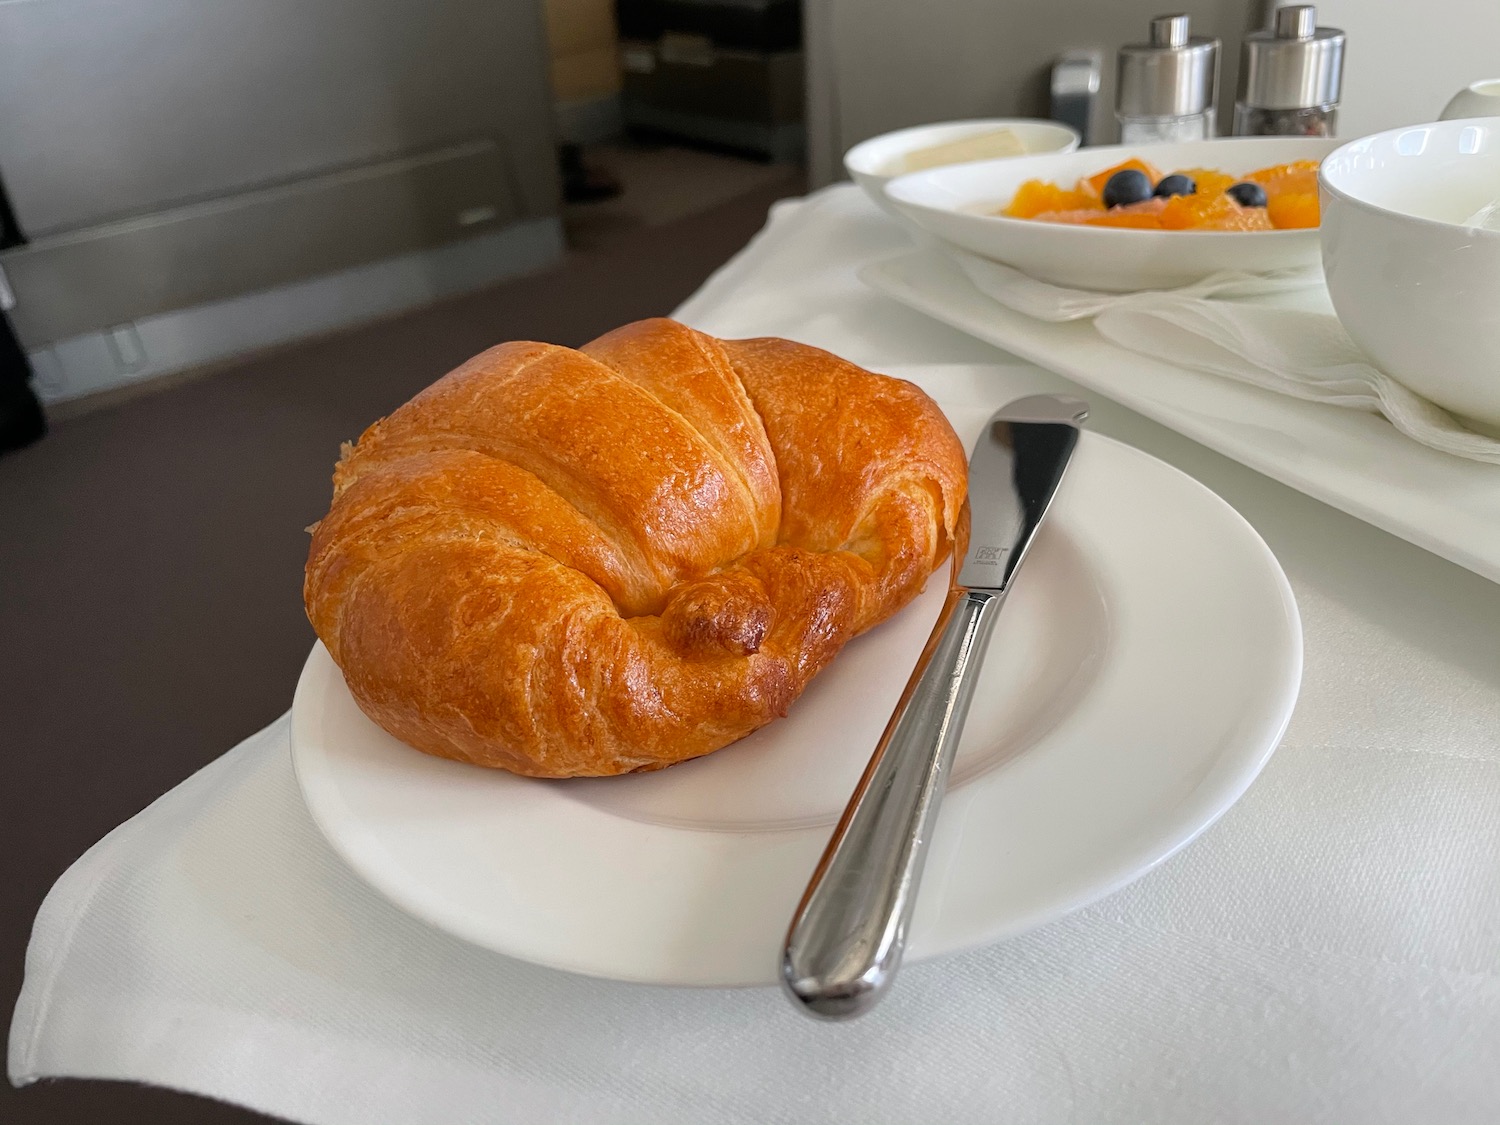 a croissant on a plate with a knife and a bowl of fruit